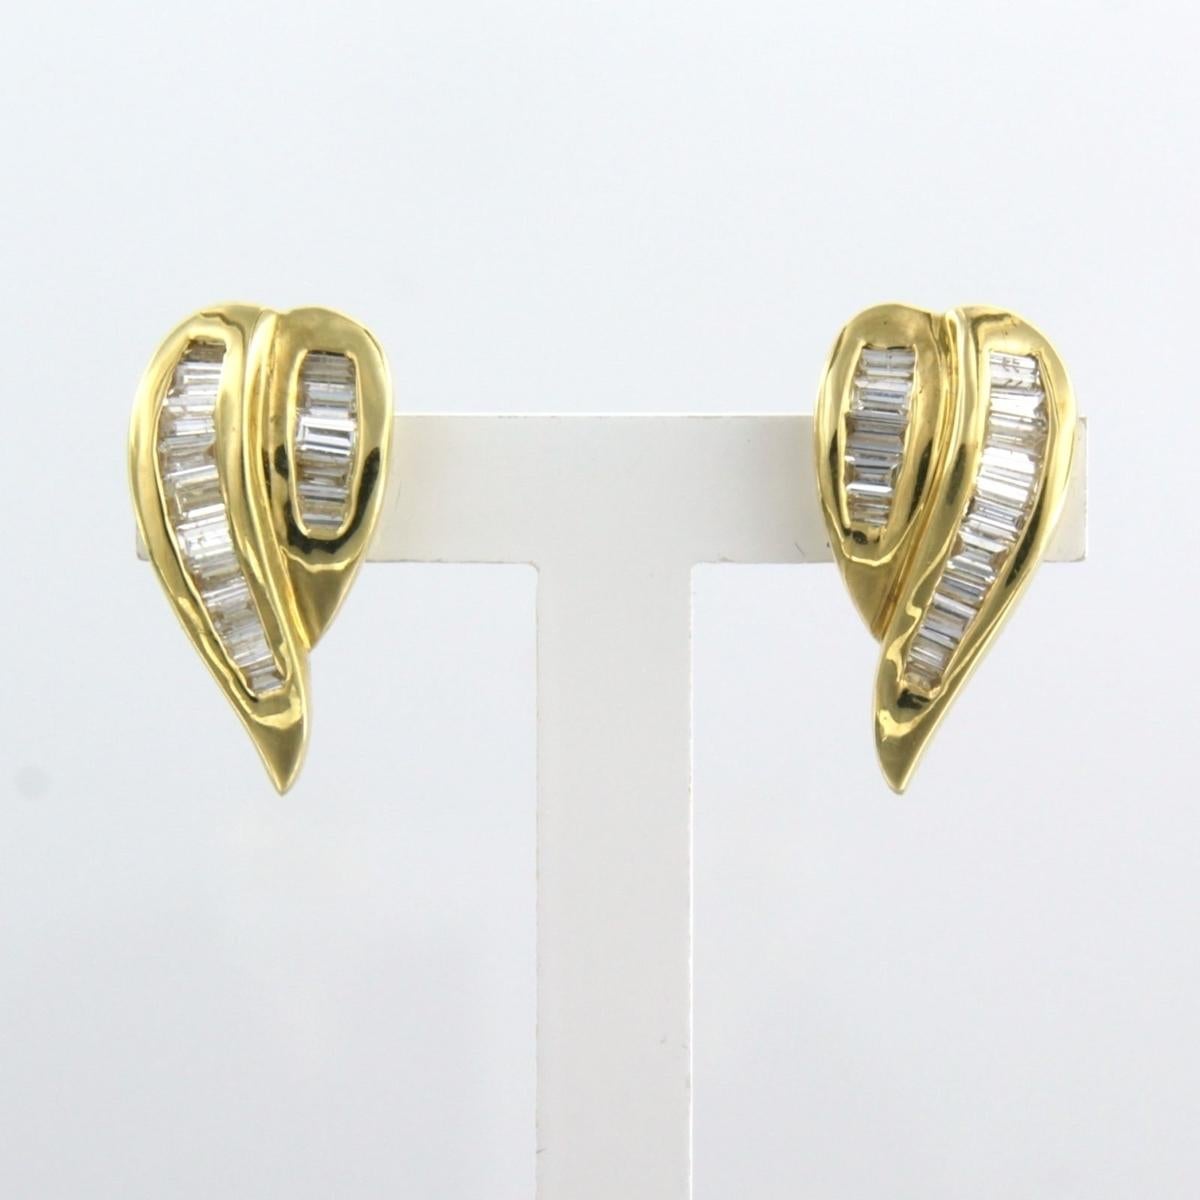 18k yellow gold stud earrings set with tper-shaped cut diamonds. 0.76ct - G/H - VS/SI

Detailed description:

the top of the ear stud is 1.5 cm long by 8.2 mm wide

weight 4.0 grams

set with

- 30 x 2.1 mm x 1.2 mm taper shape cut diamond, total